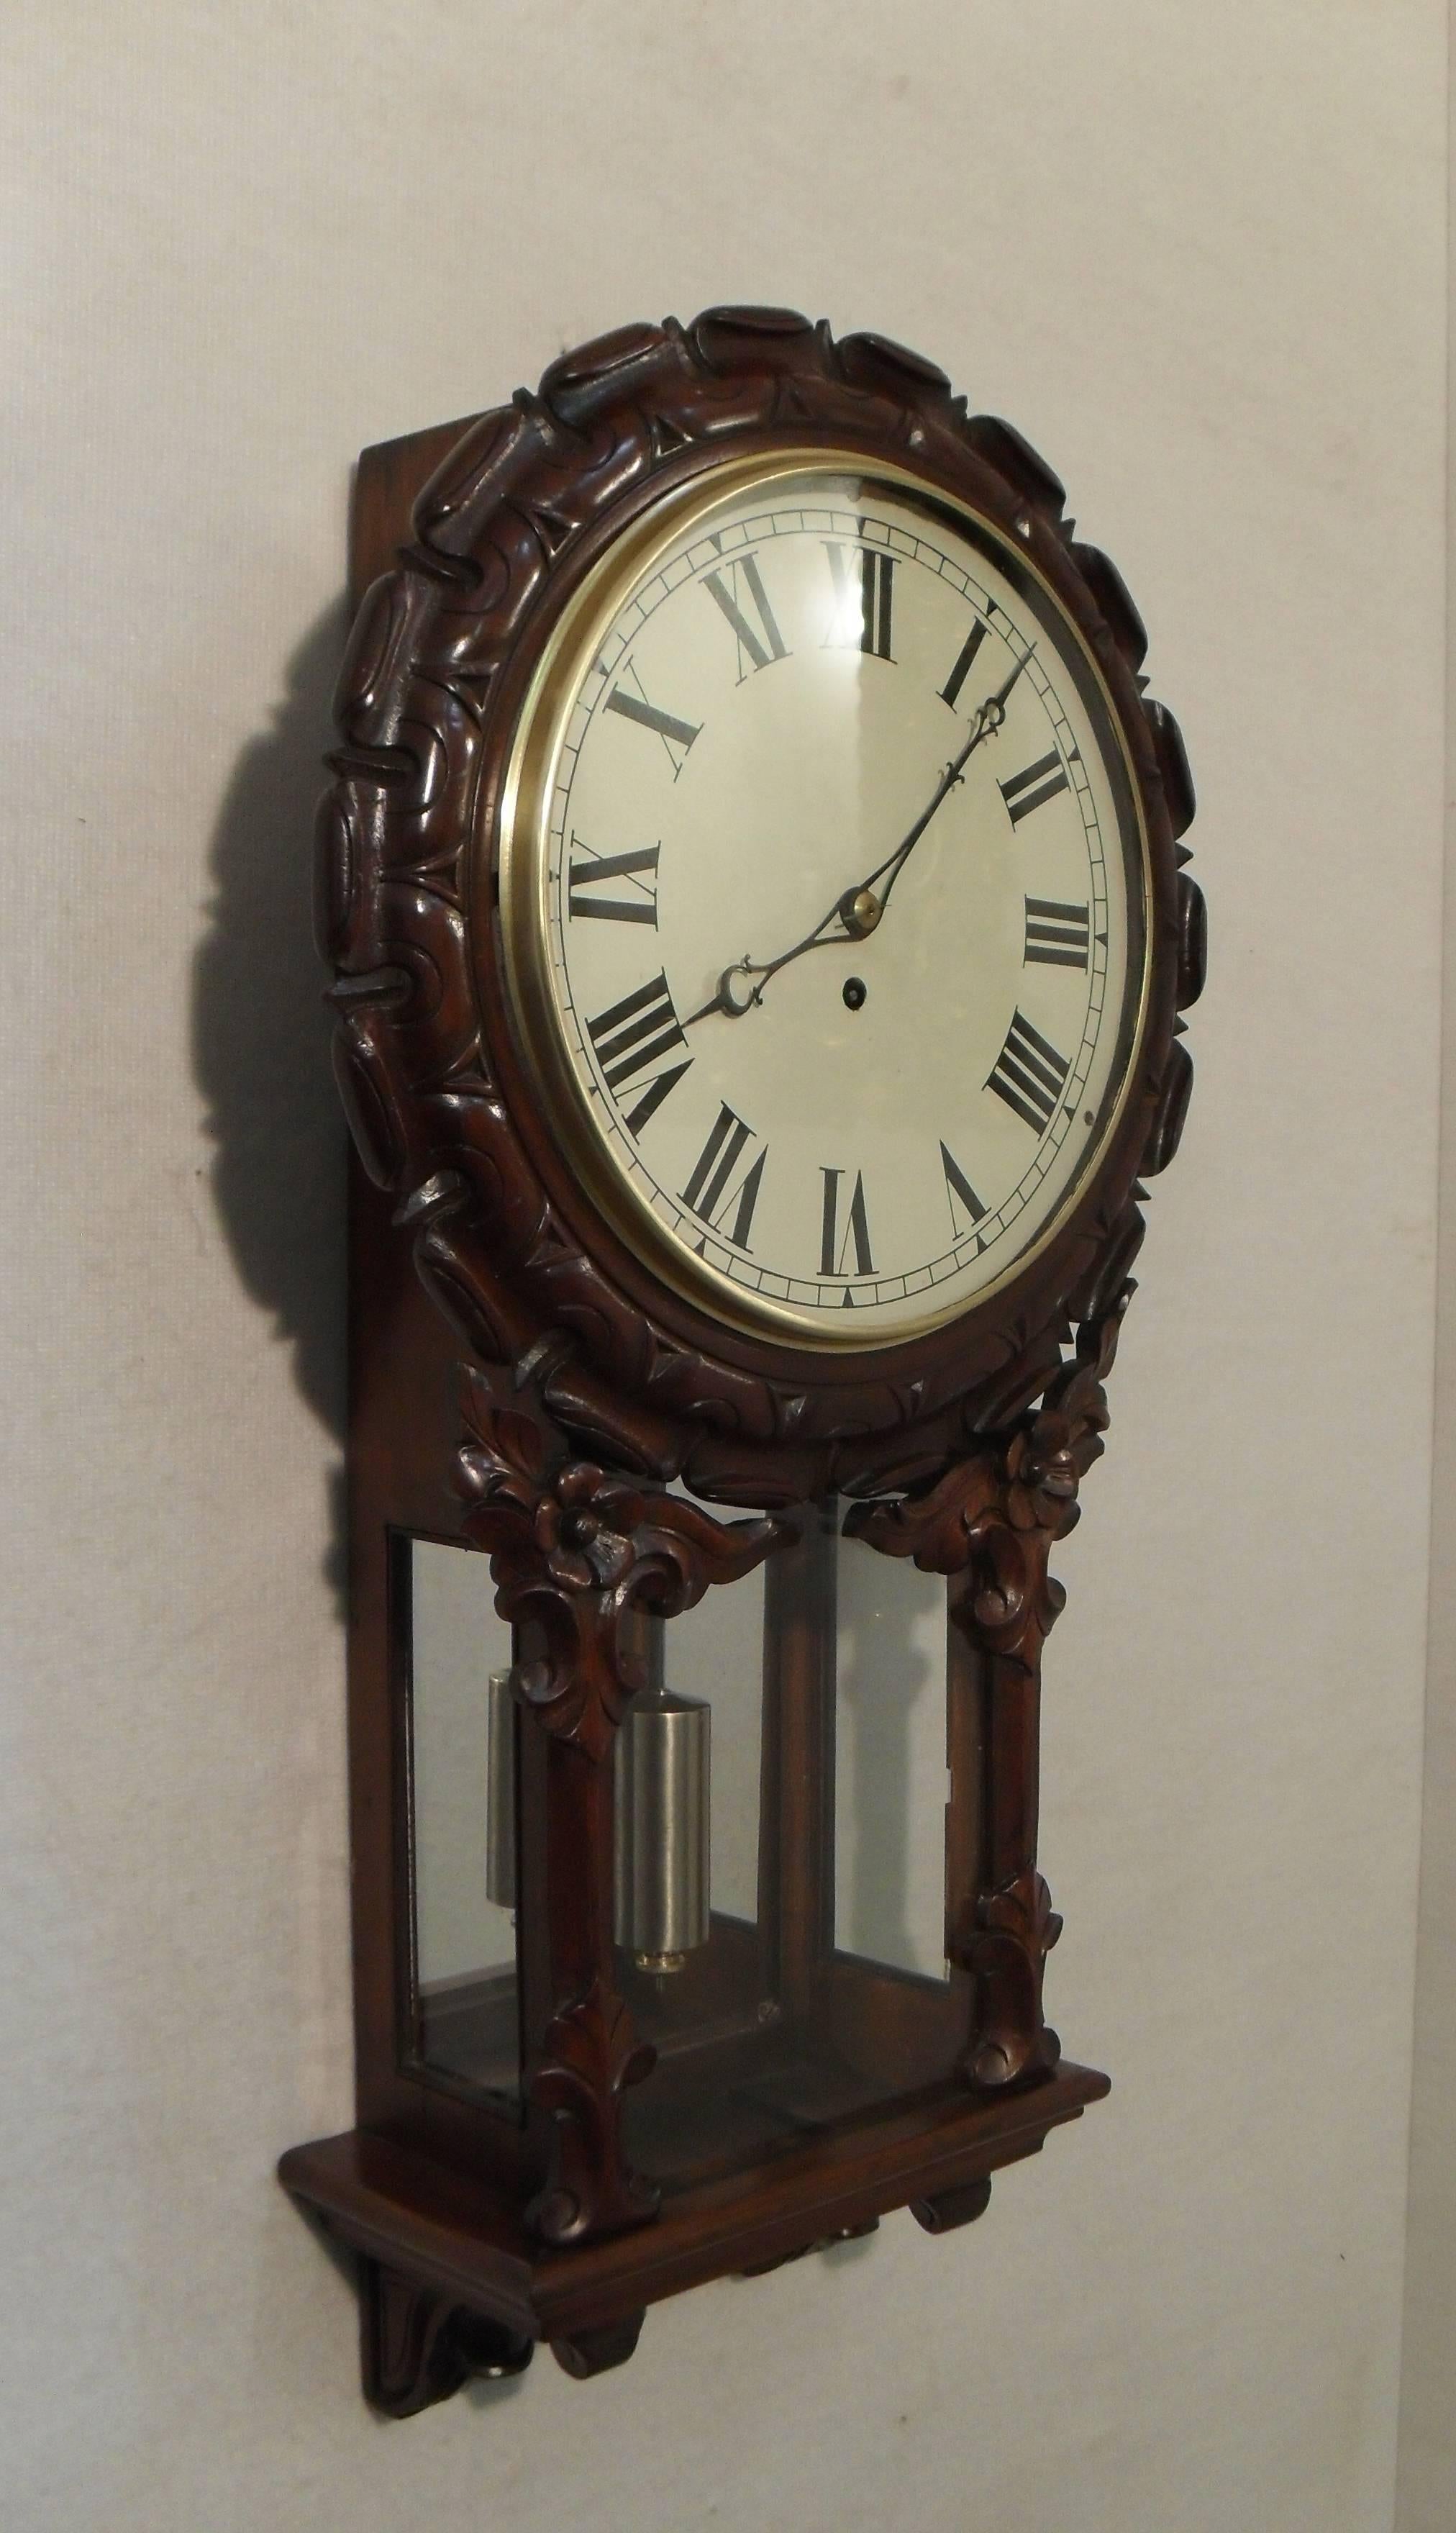 A good quality carved mahogany drop dial wall clock with mirror back to the pendulum viewing window. The clock has a painted twelve inch dial with an eight day, single fuse timepiece movement and anchor escapement.

The movement has been cleaned